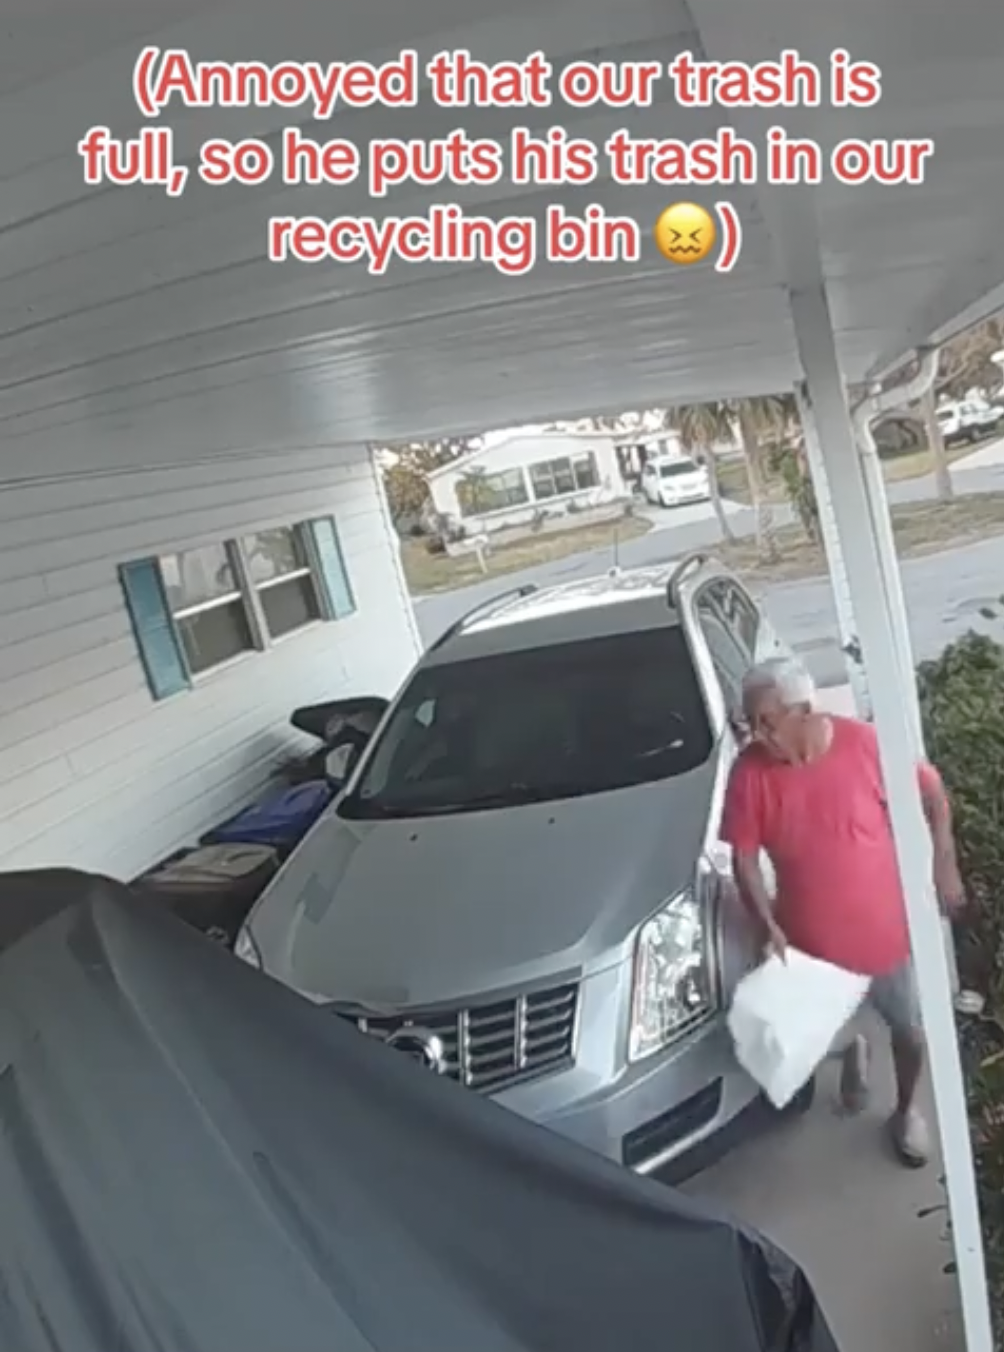 windshield - Annoyed that our trash is full, so he puts his trash in our recycling bin